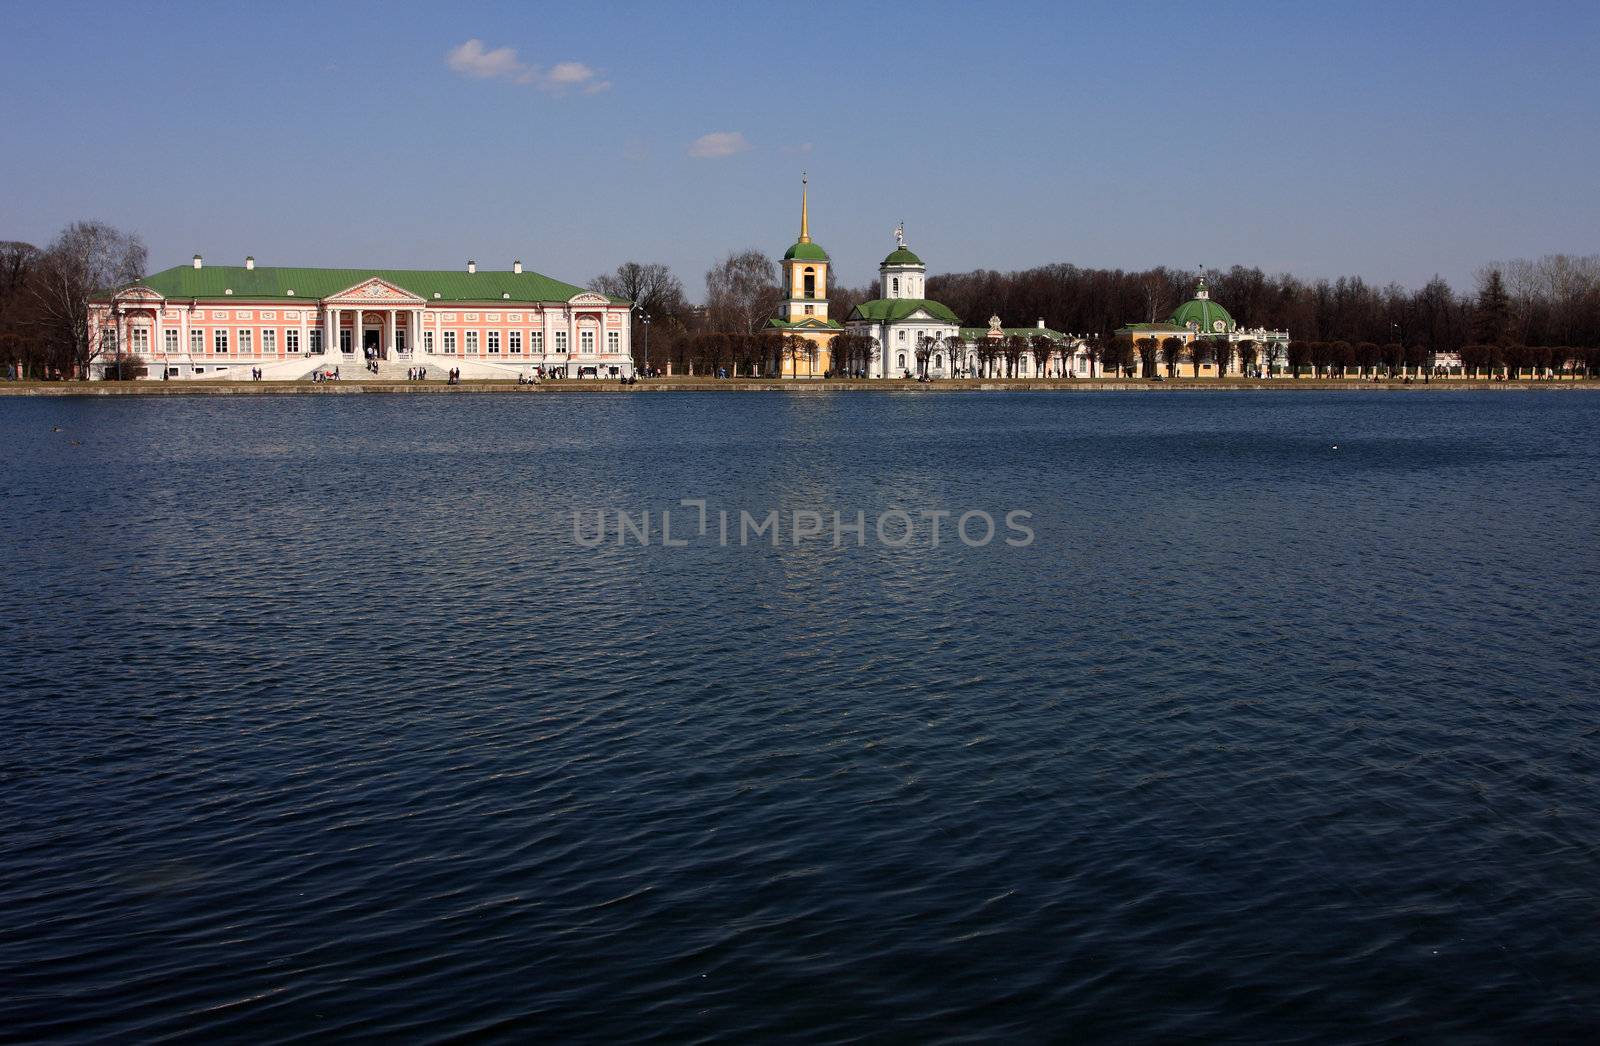 manor, pond, water, house, church, origins, fair, trees, life, giving, across, most, old, monument, architecture, pleasure, residence, field, marshal, count, form, classicism